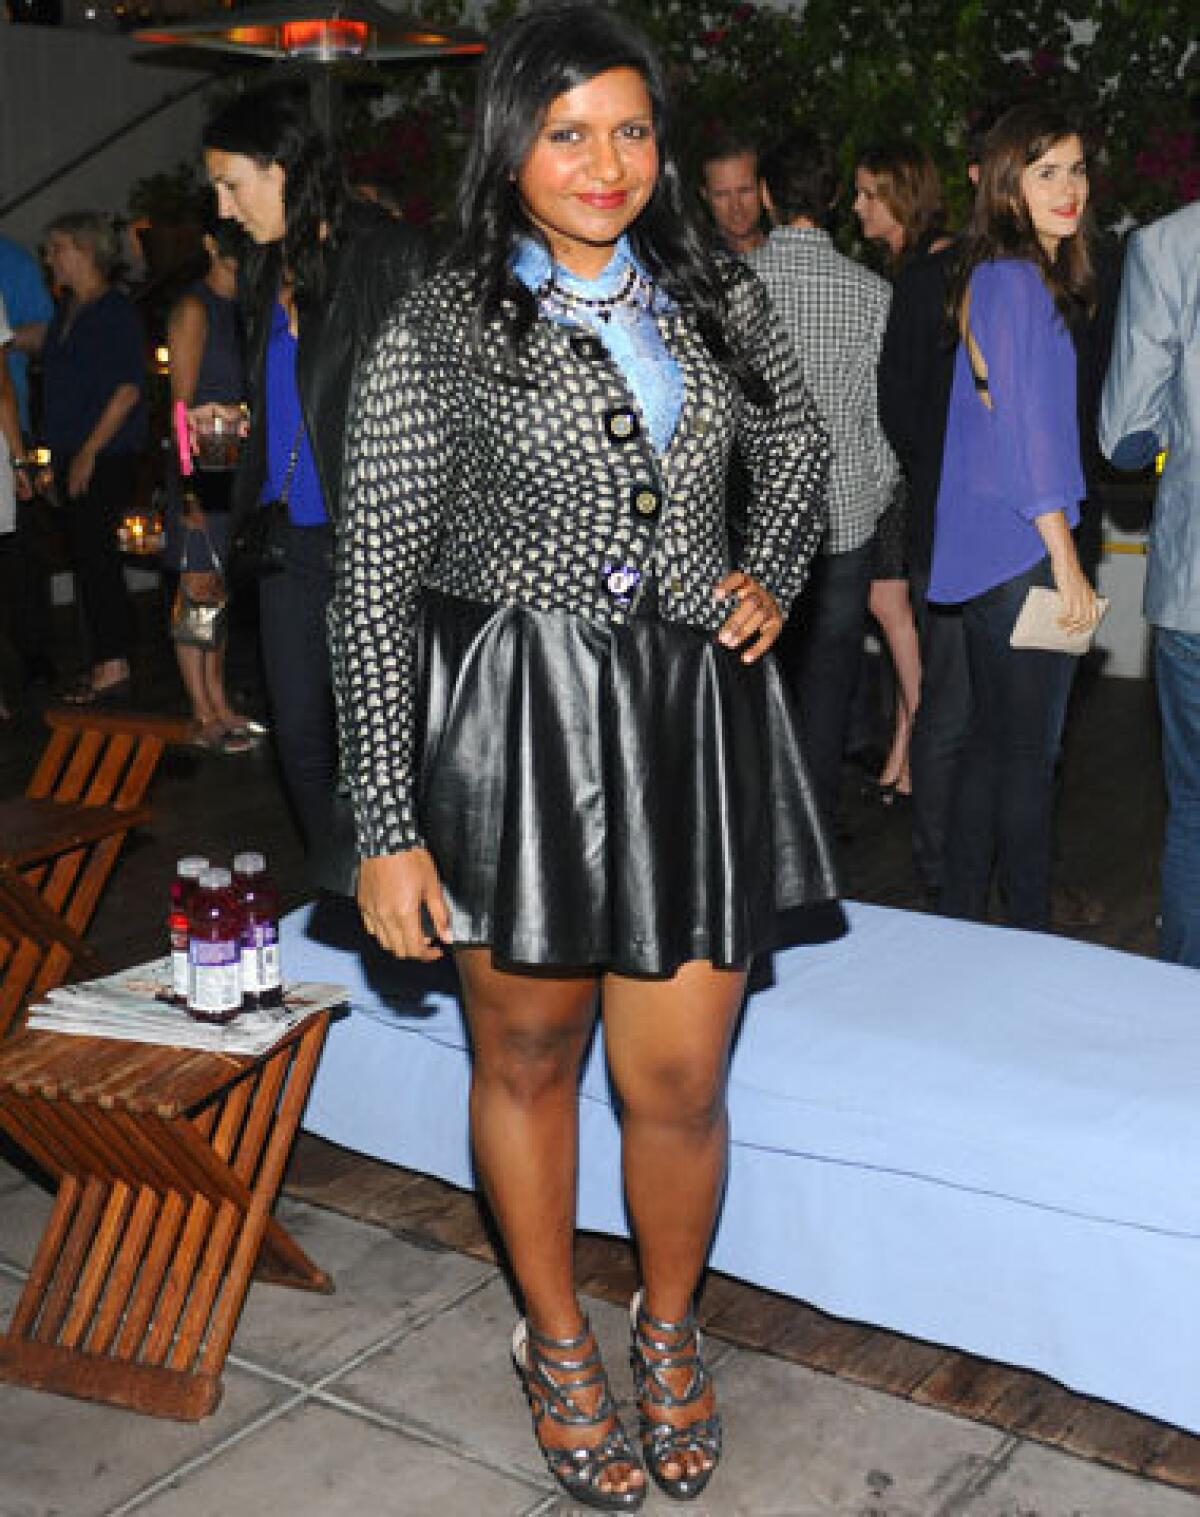 Mindy Kaling steps out celebrating her new show "The Mindy Project."